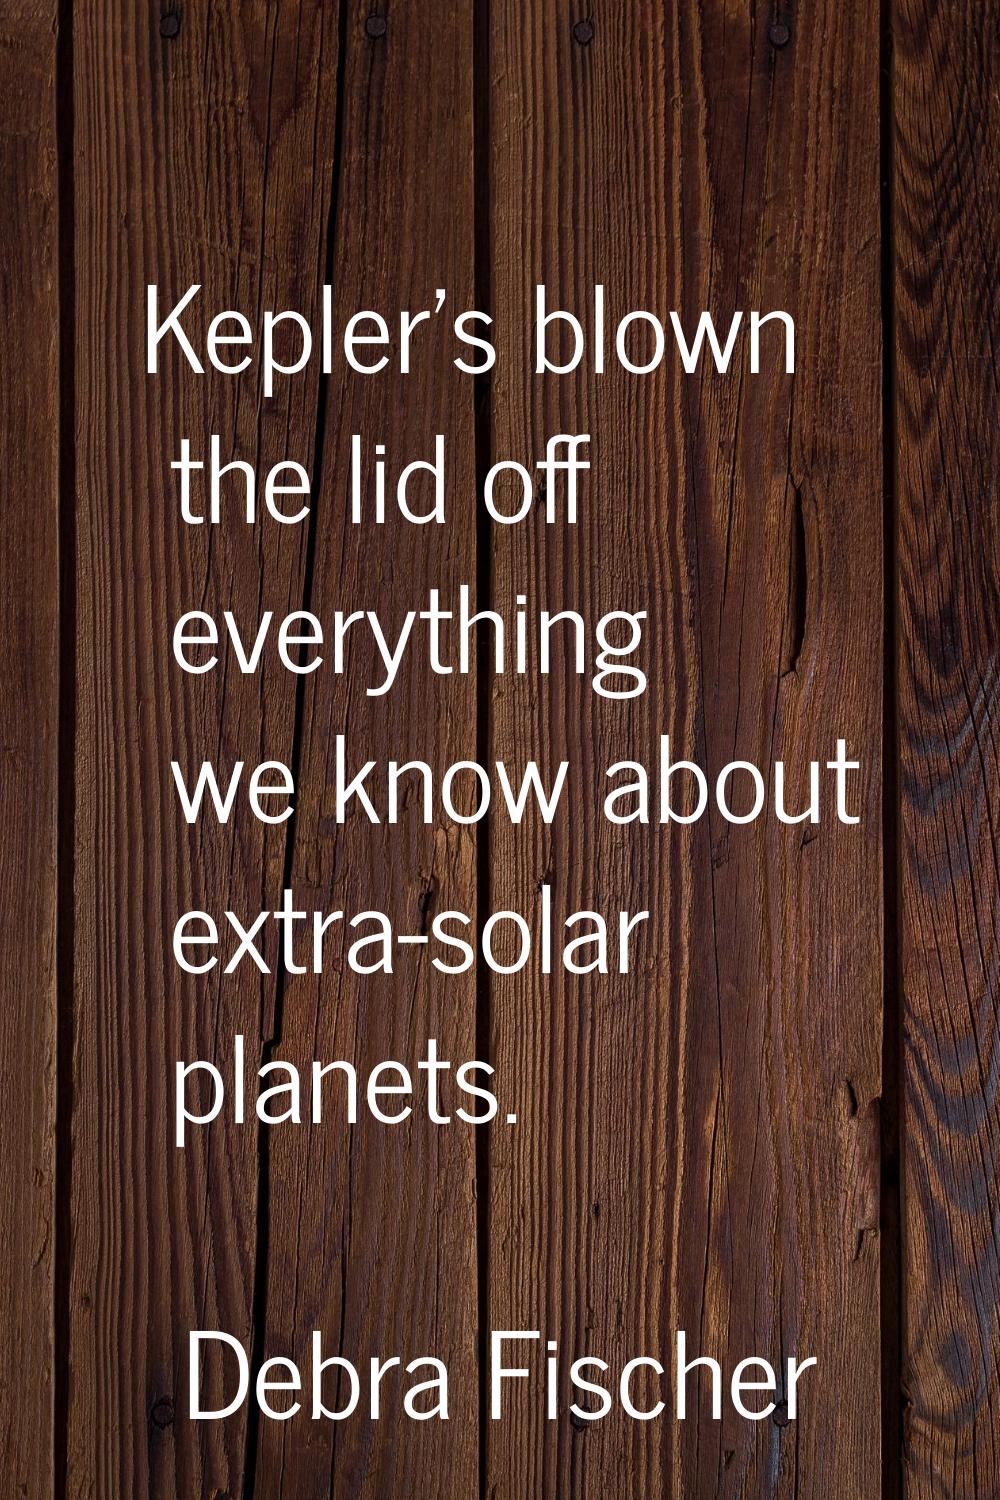 Kepler's blown the lid off everything we know about extra-solar planets.